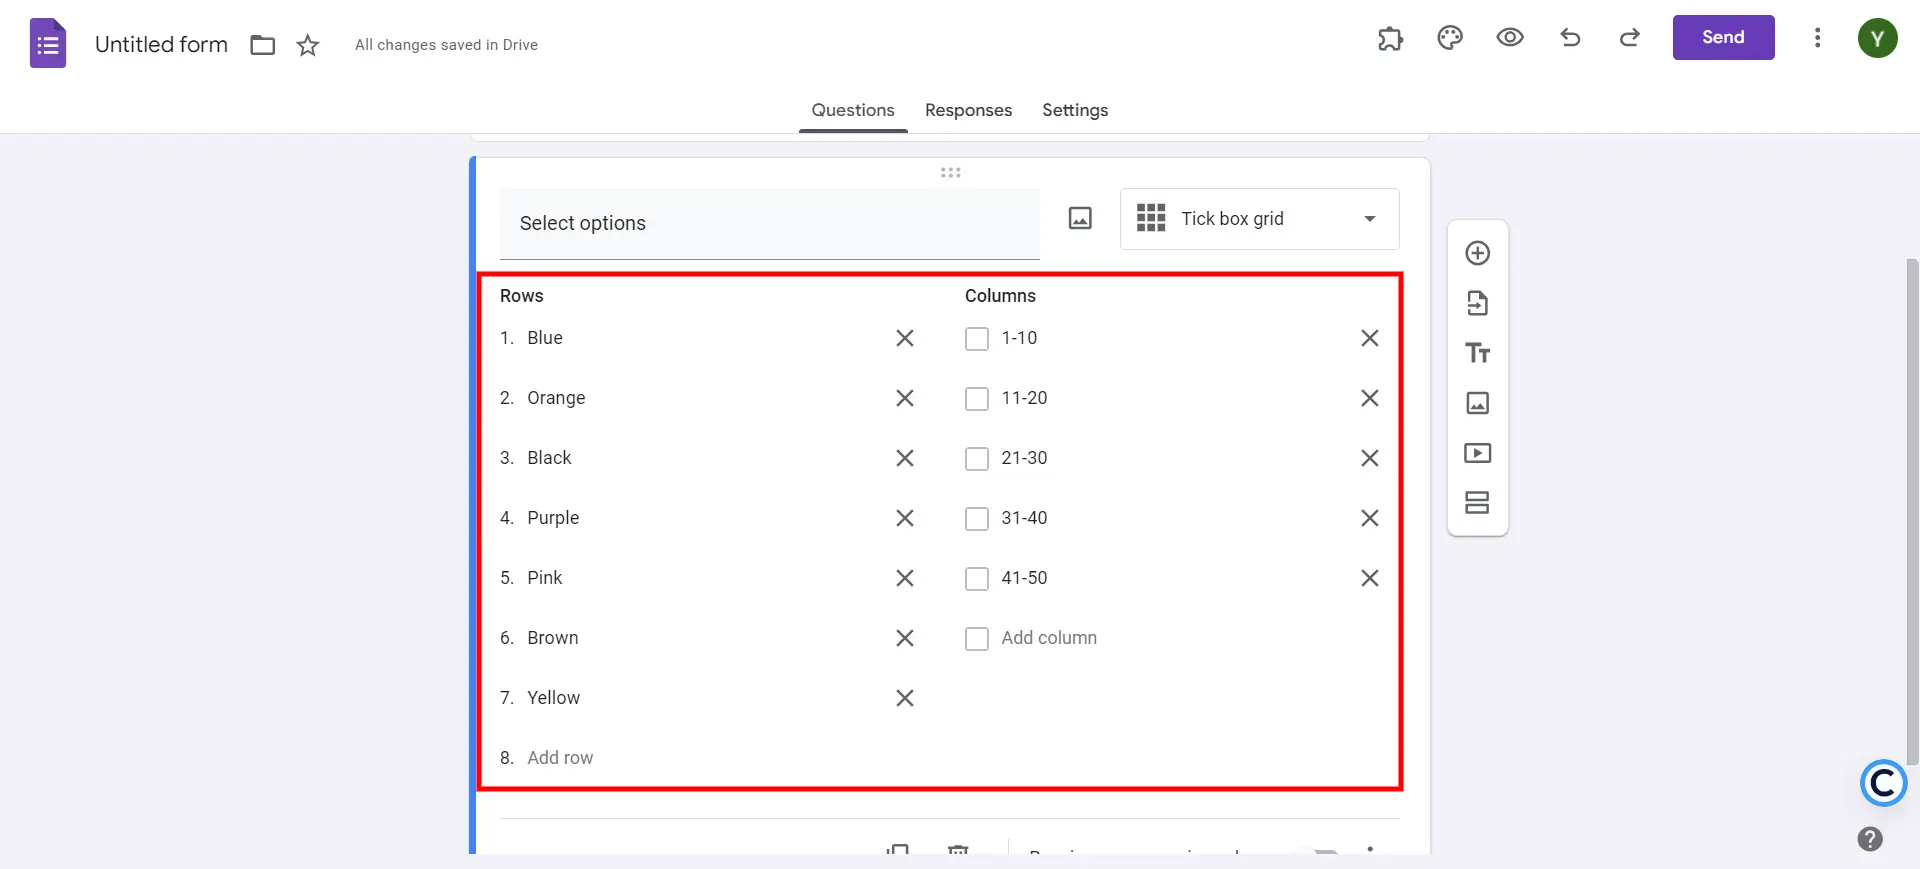 Checkbox Grid in Google Forms - Add rows and columns